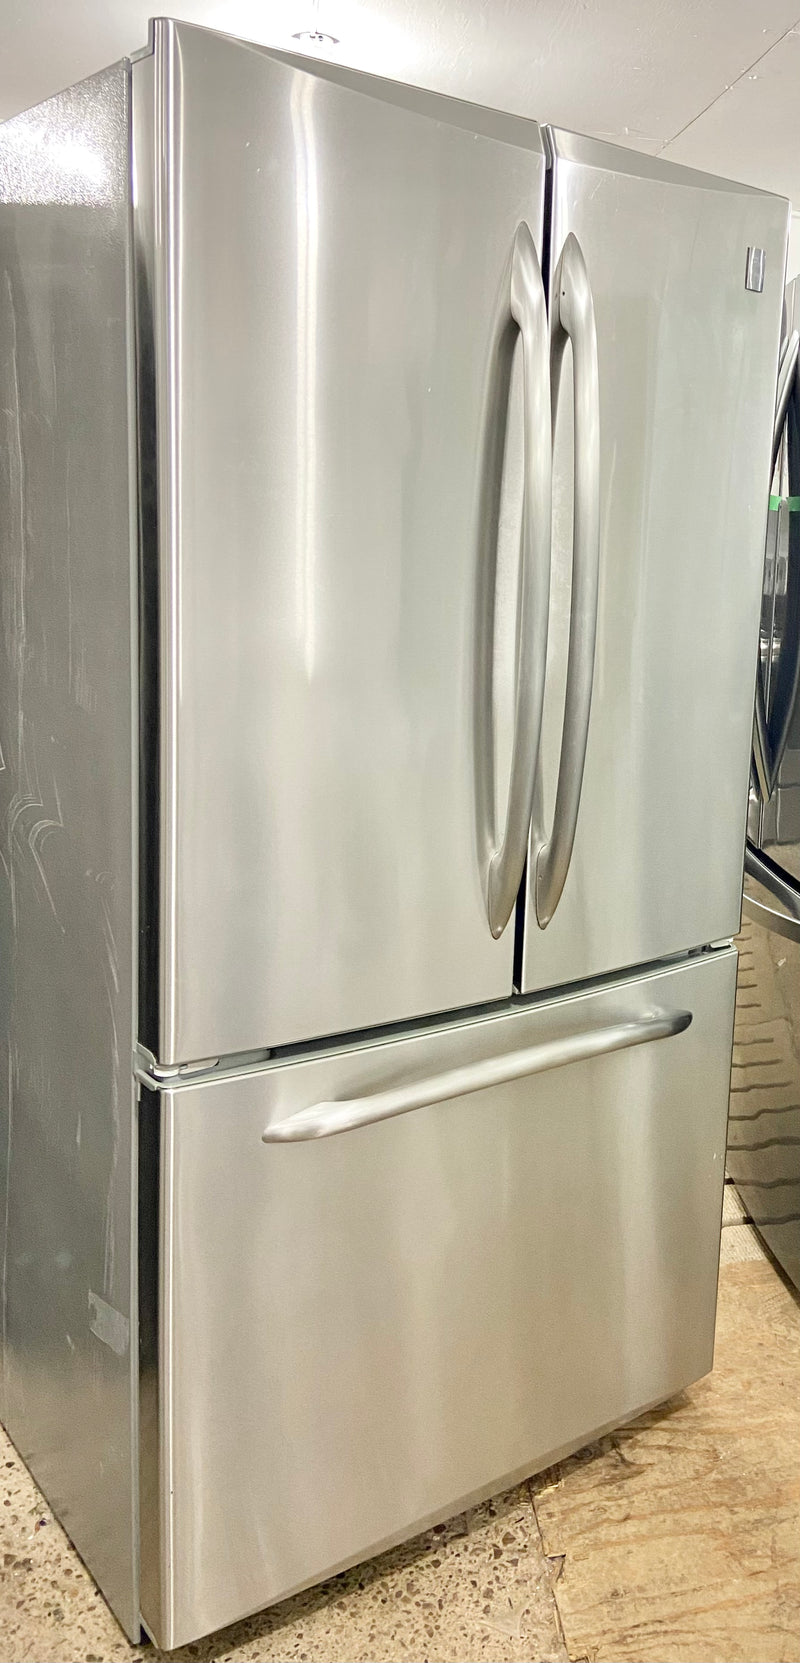 GE 33'' Wide Stainless Steel French Door Fridge with Water and Ice Maker, Free 60 Day Warranty